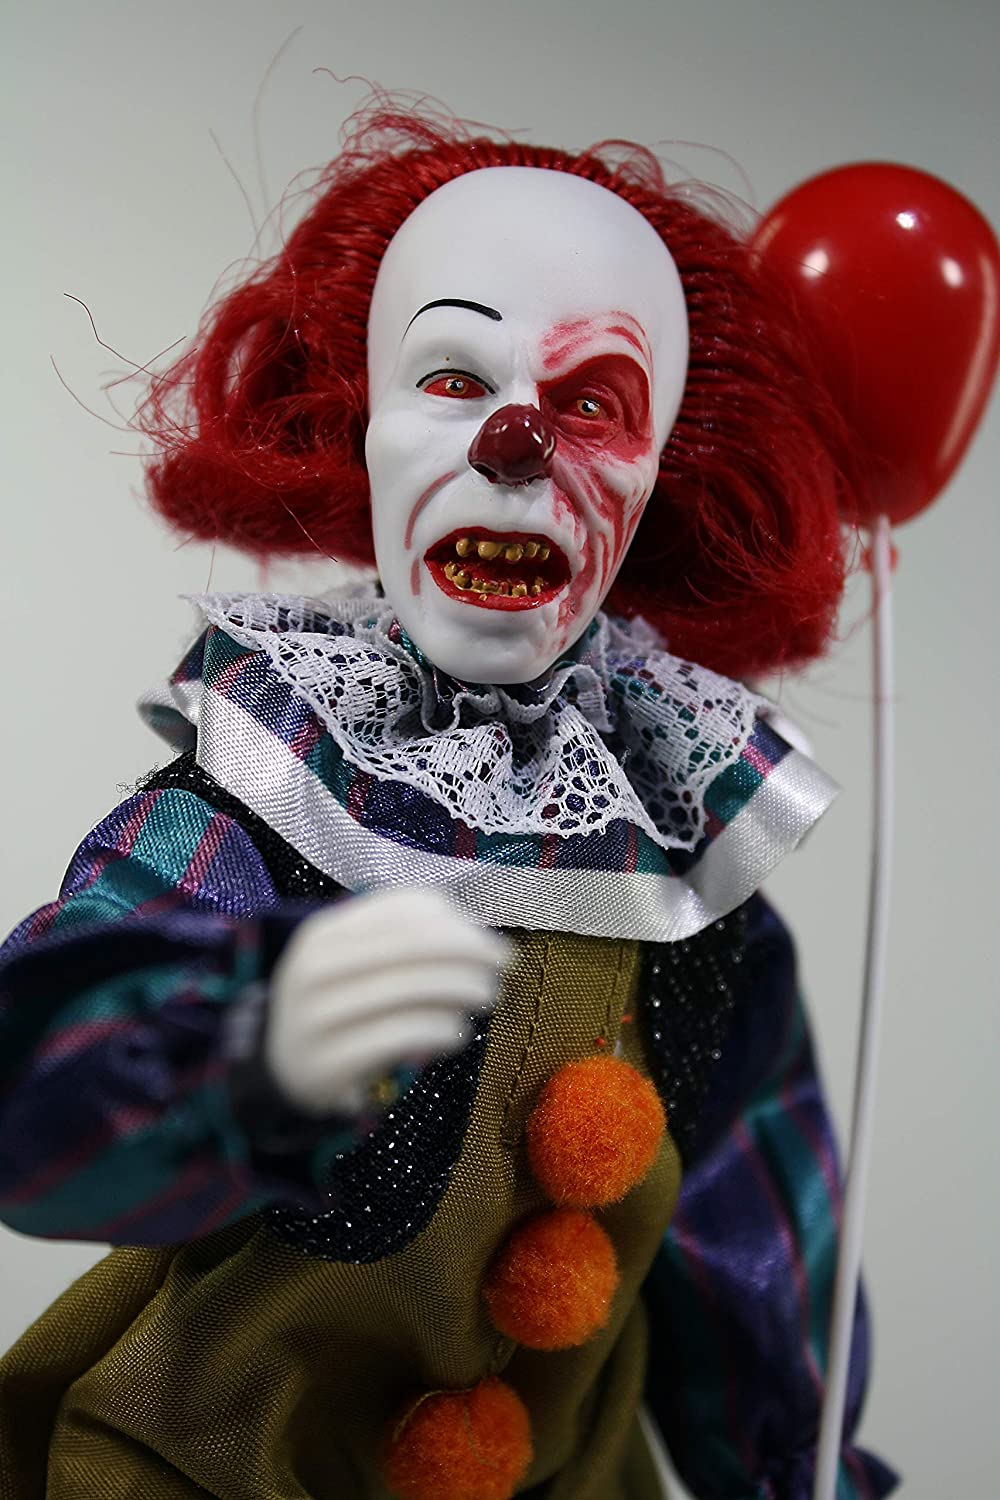 Mego Figurine Grippesou Pennywise 1990 Version2020 Photo5